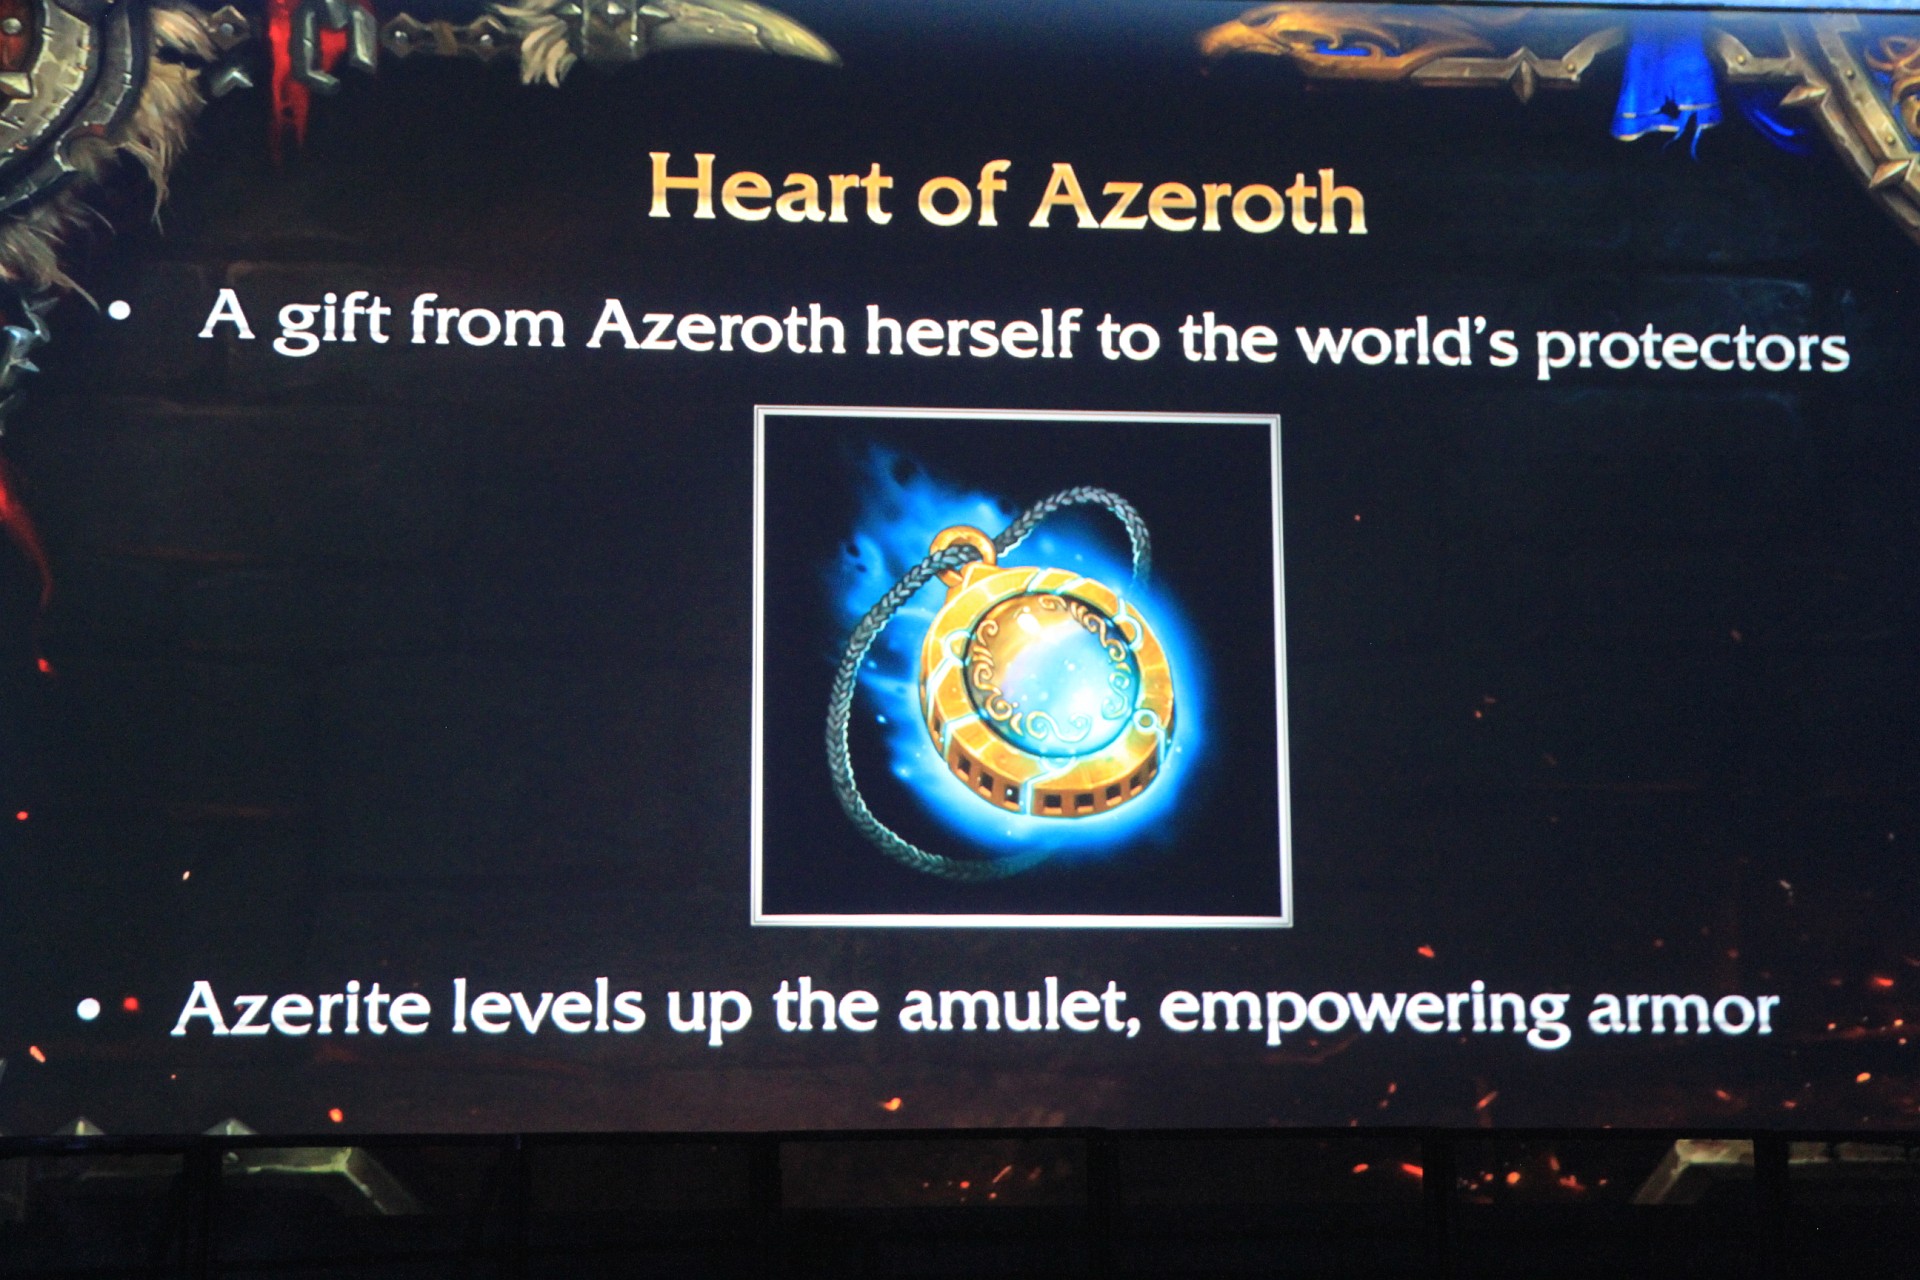 World of Warcraft: Battle for Azeroth.